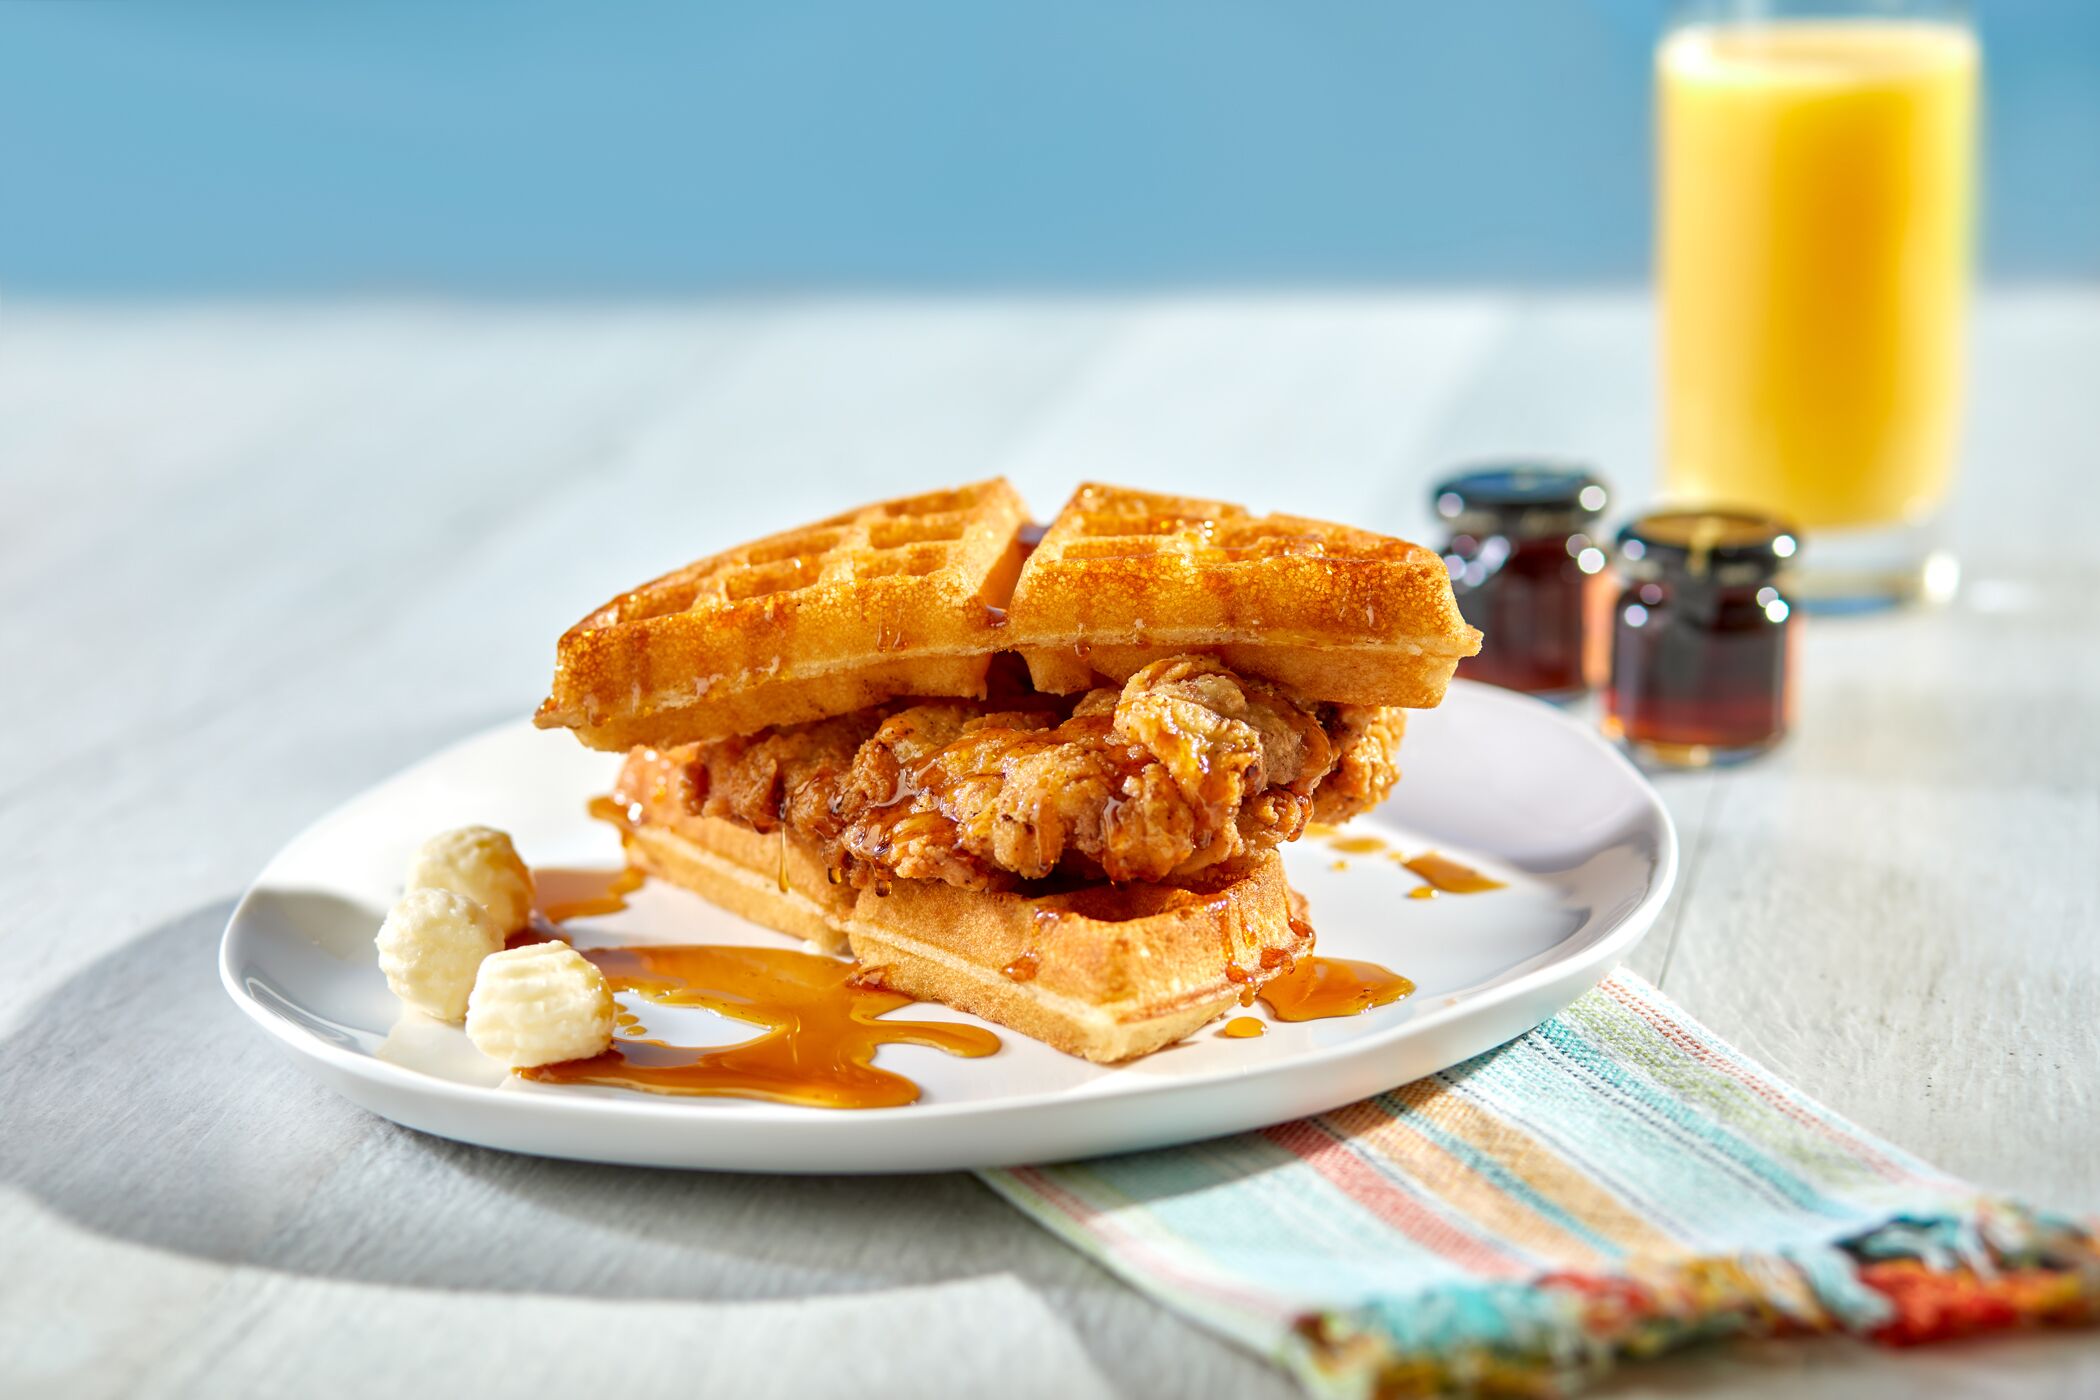 Universal Orlando Reveals Exclusive look at the Food and Drinks at Endless Summer Resort – Dockside Inn and Suites